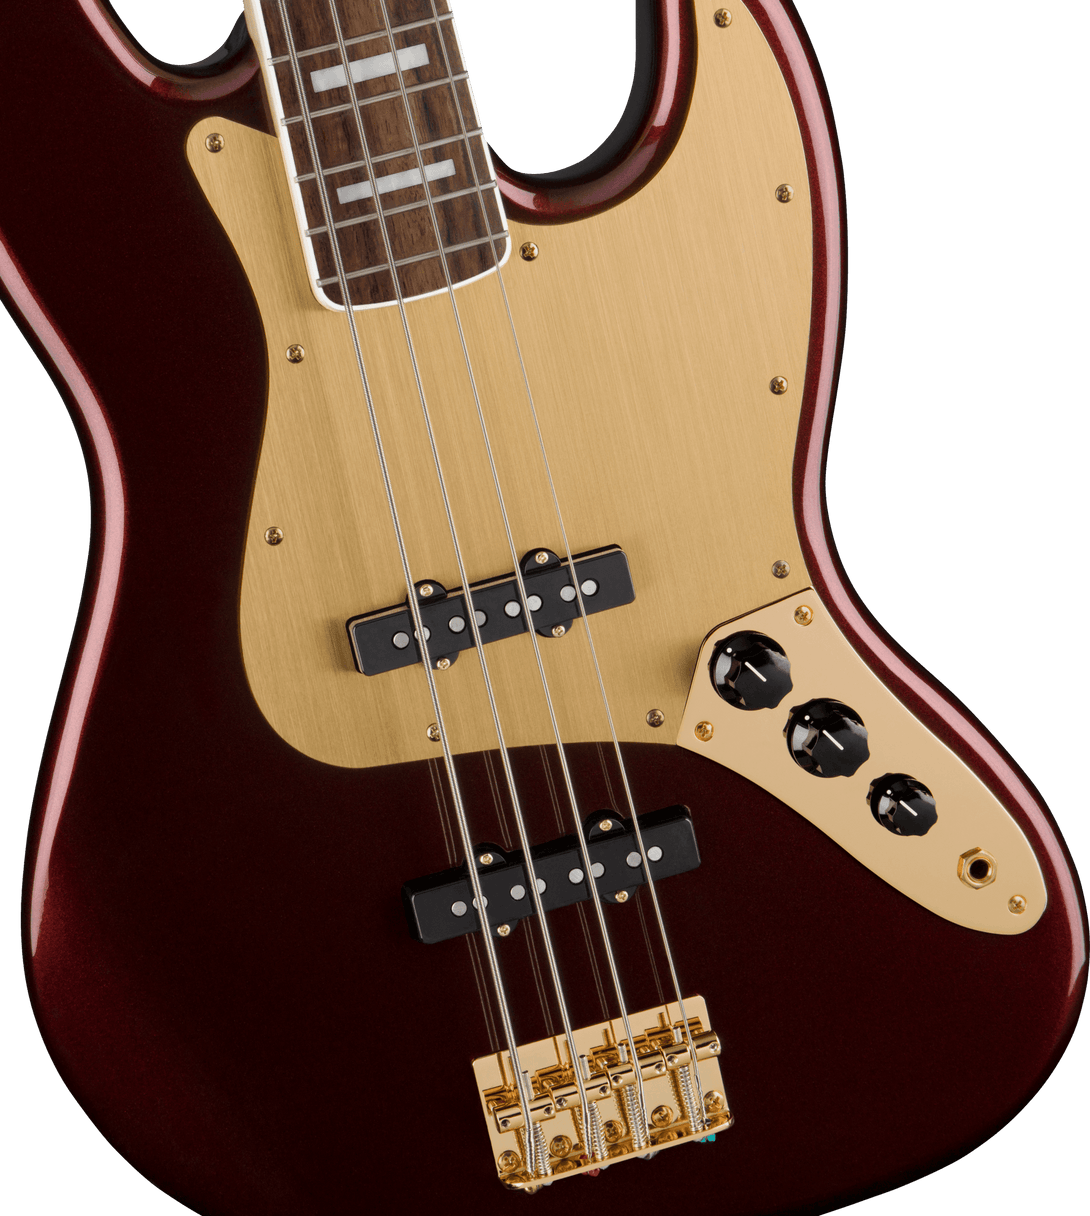 Bajo Electrico Fender Squier 40th Anniversary Jazz Bass®, Gold Edition, Laurel Fingerboard, Gold Anodized Pickguard, Ruby Red Metallic 0379440515 - The Music Site